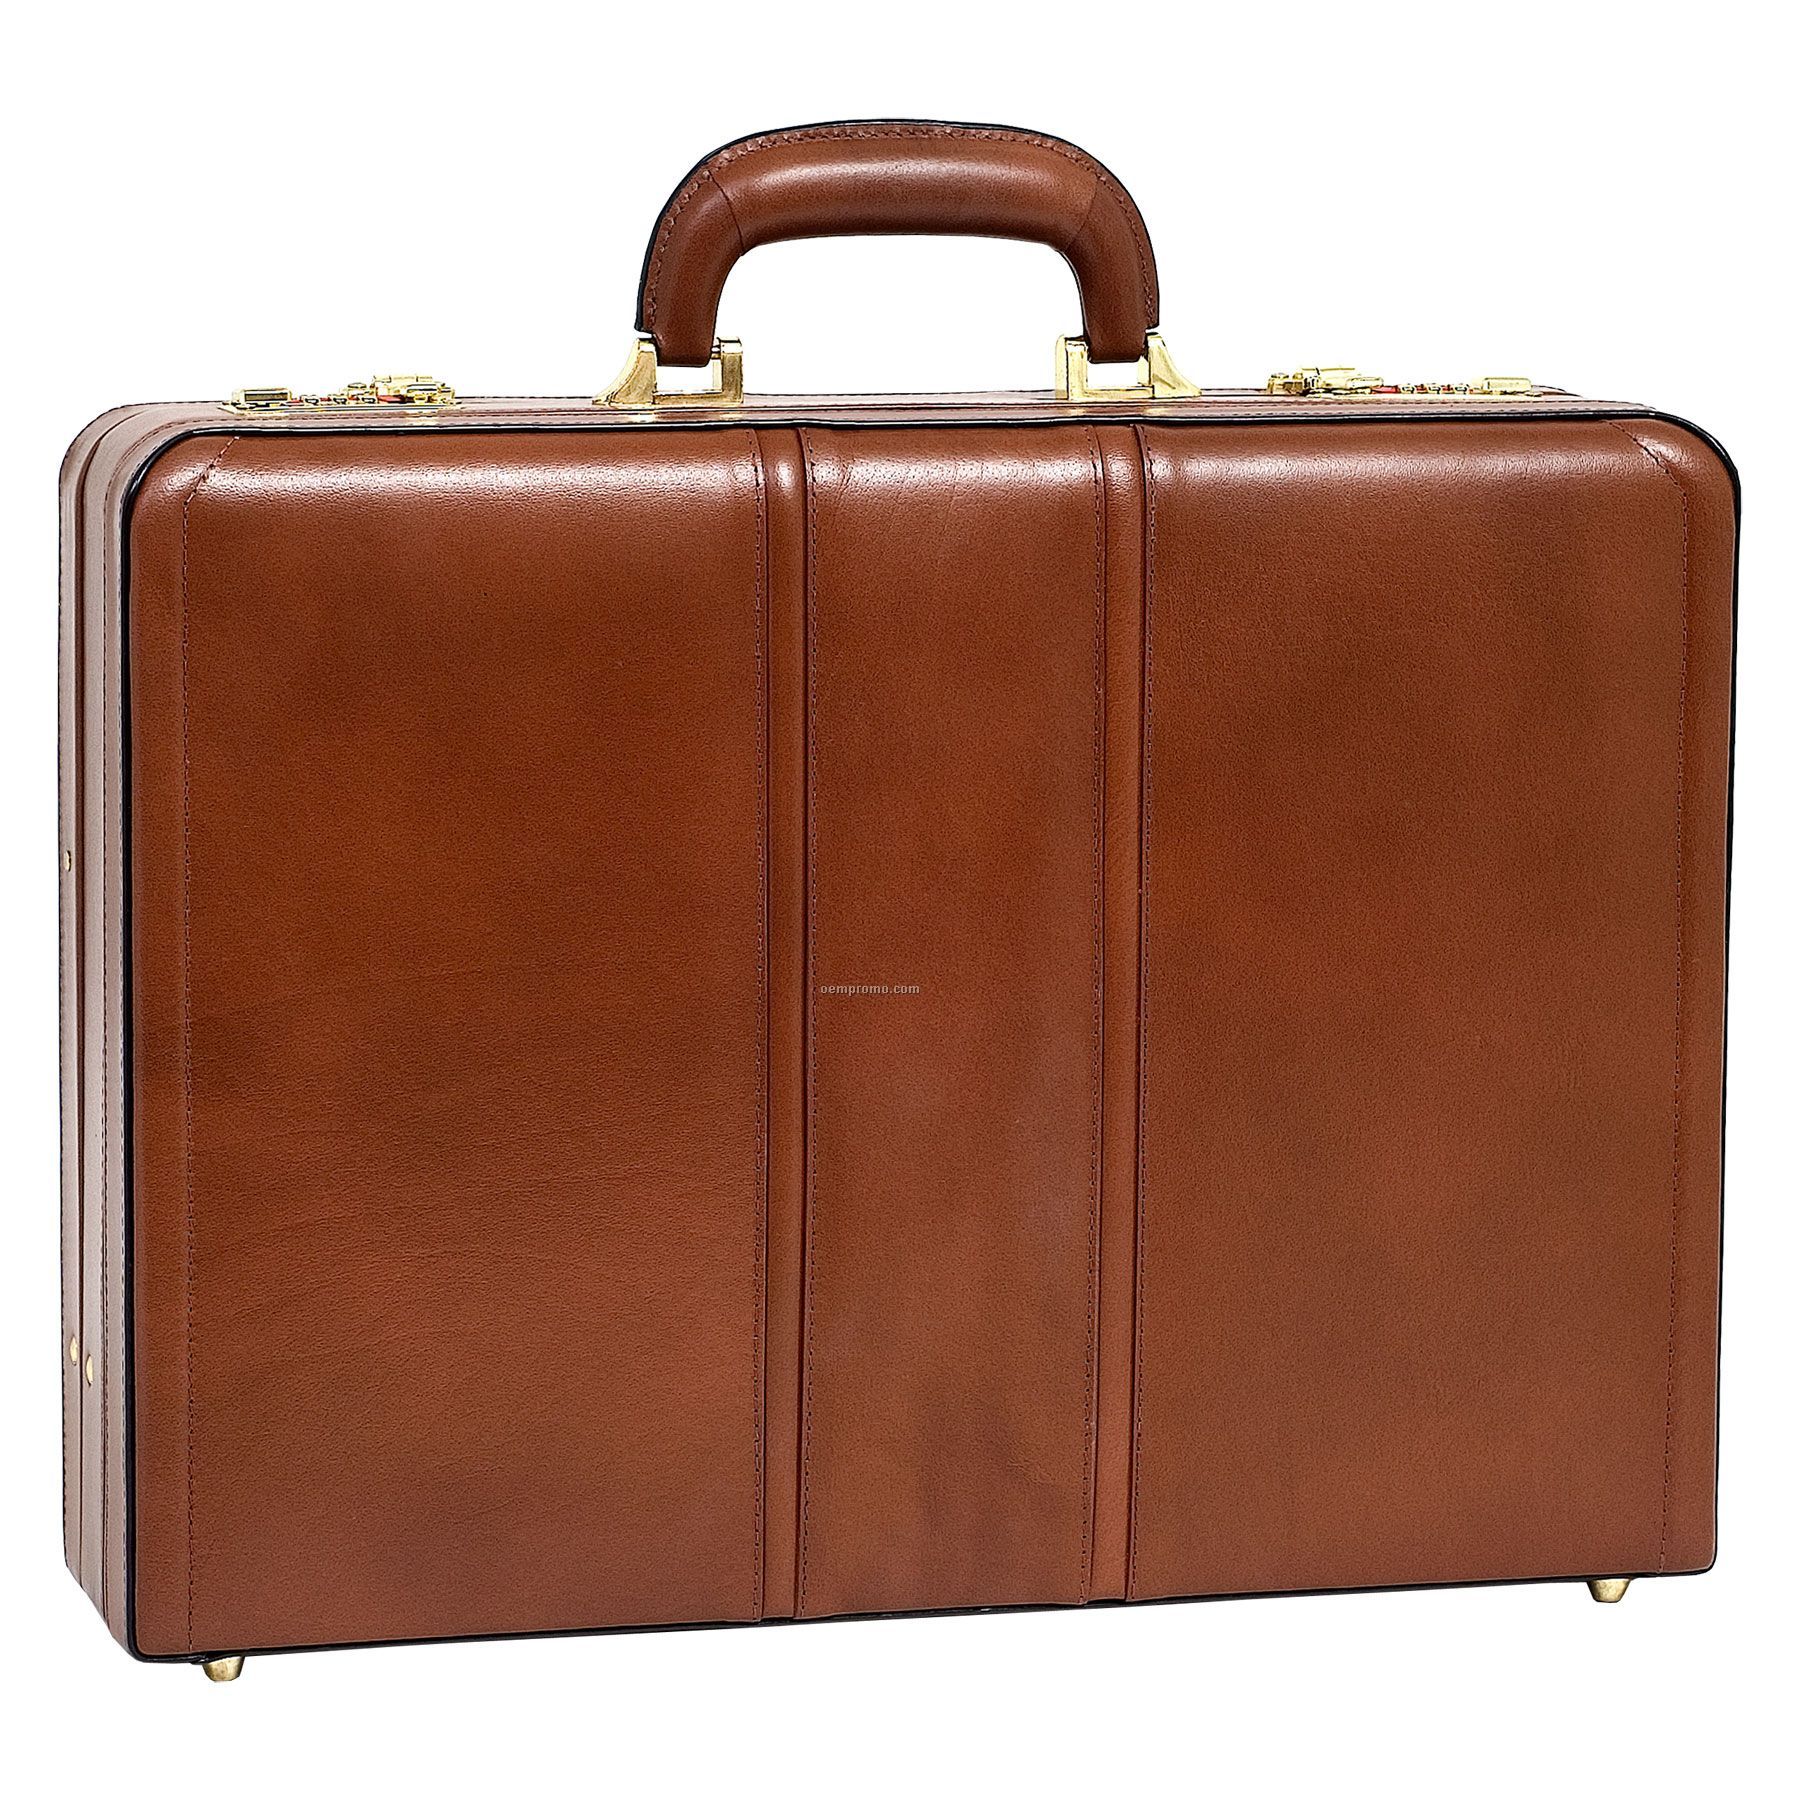 Coughlin Leather Expandable Attache Case - Brown